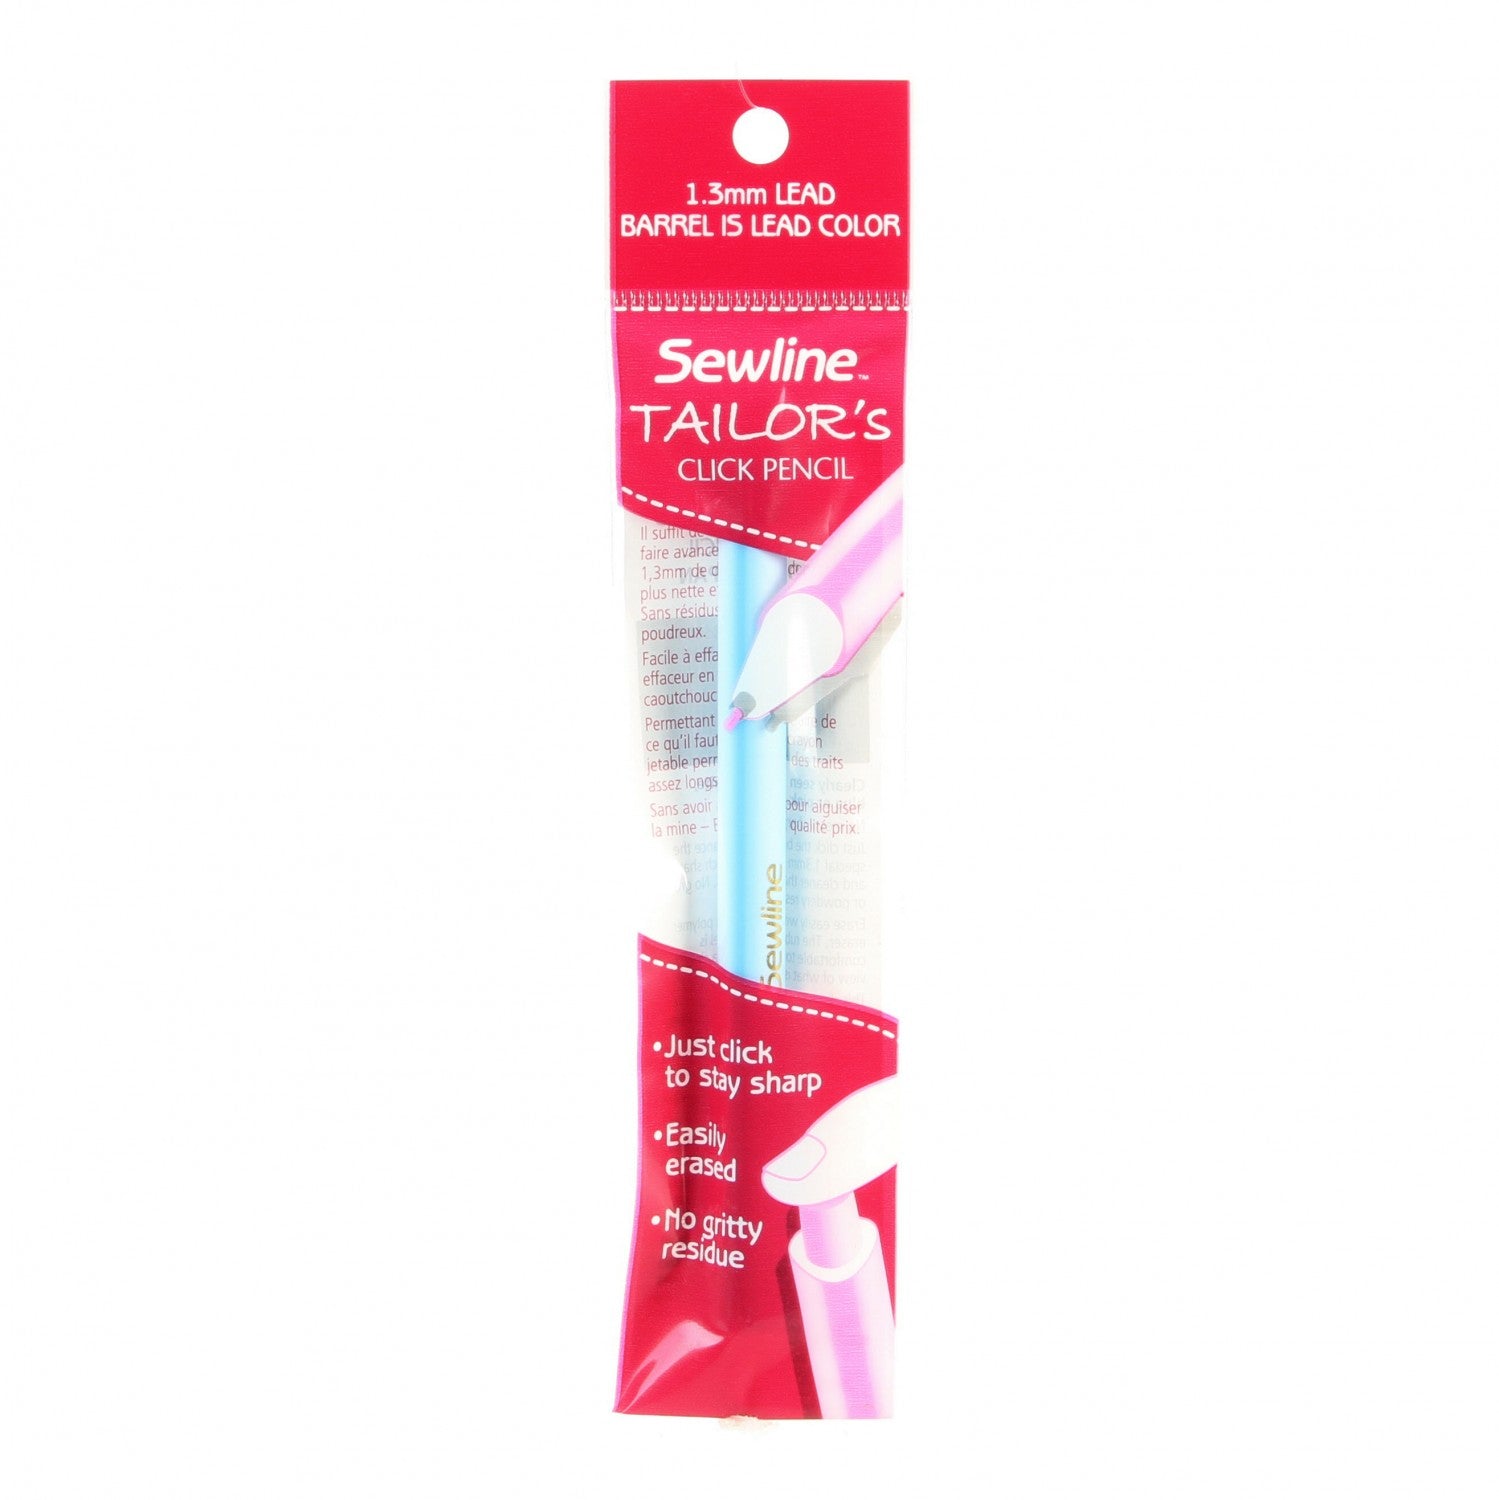  United Notions Blue Sewline Water-Soluble Fabric Glue Pen  Refill 2 Count 10/Pk 10 Pack